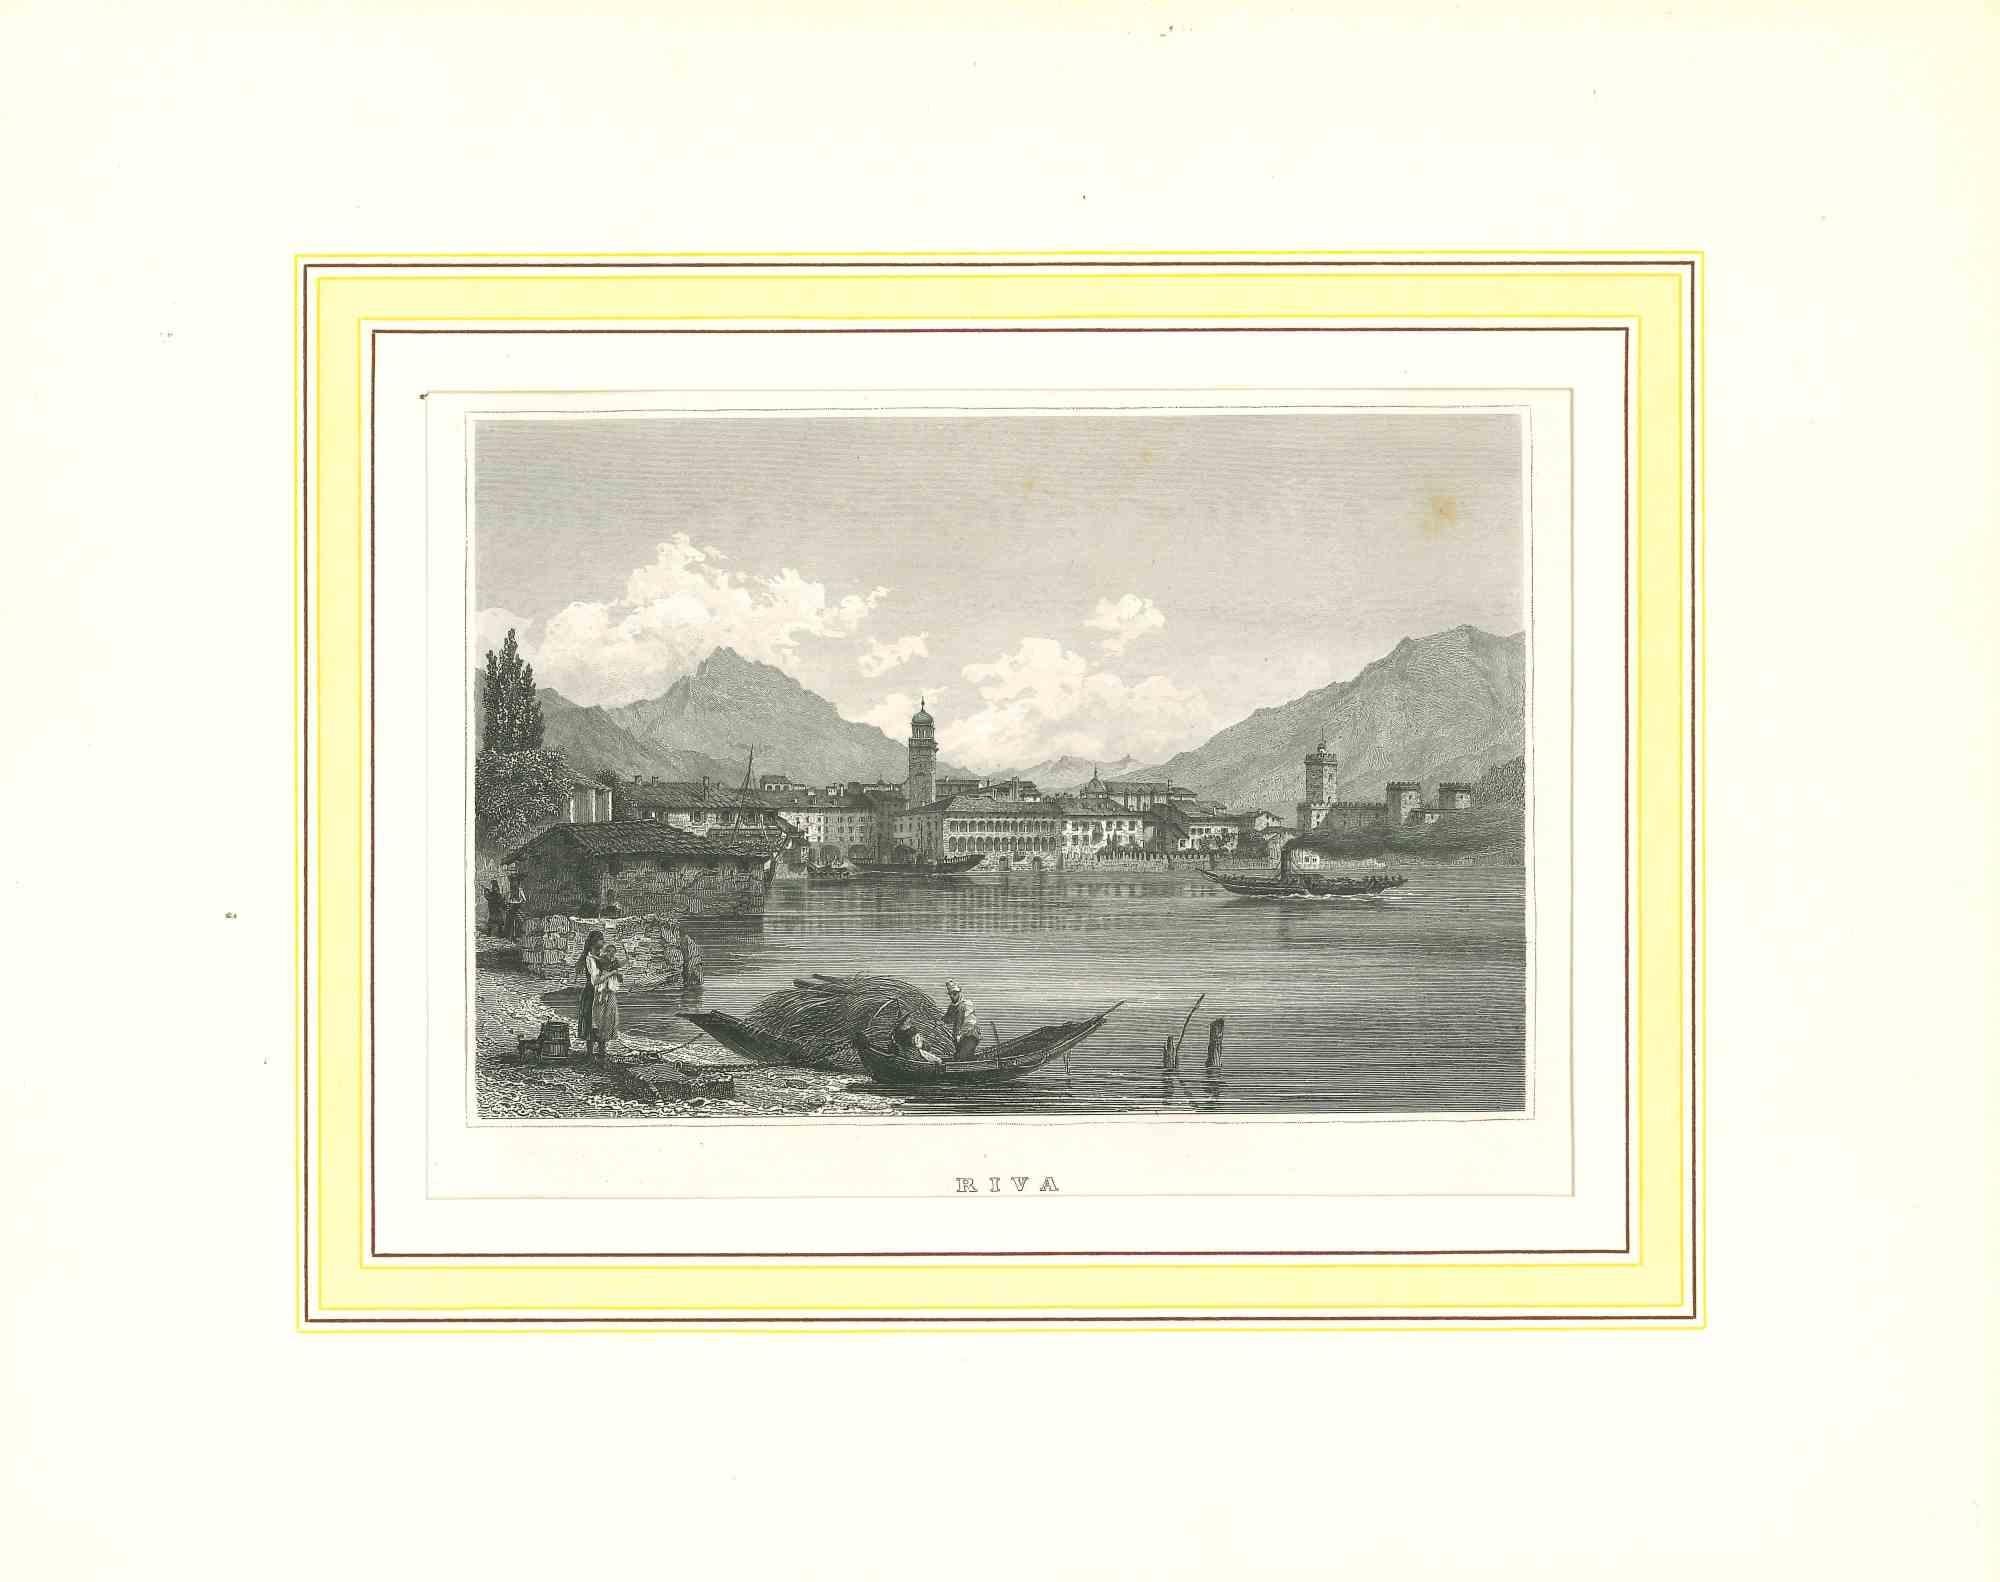 Unknown Figurative Print - Ancient View of Riva - Original Lithograph - Early 19th Century